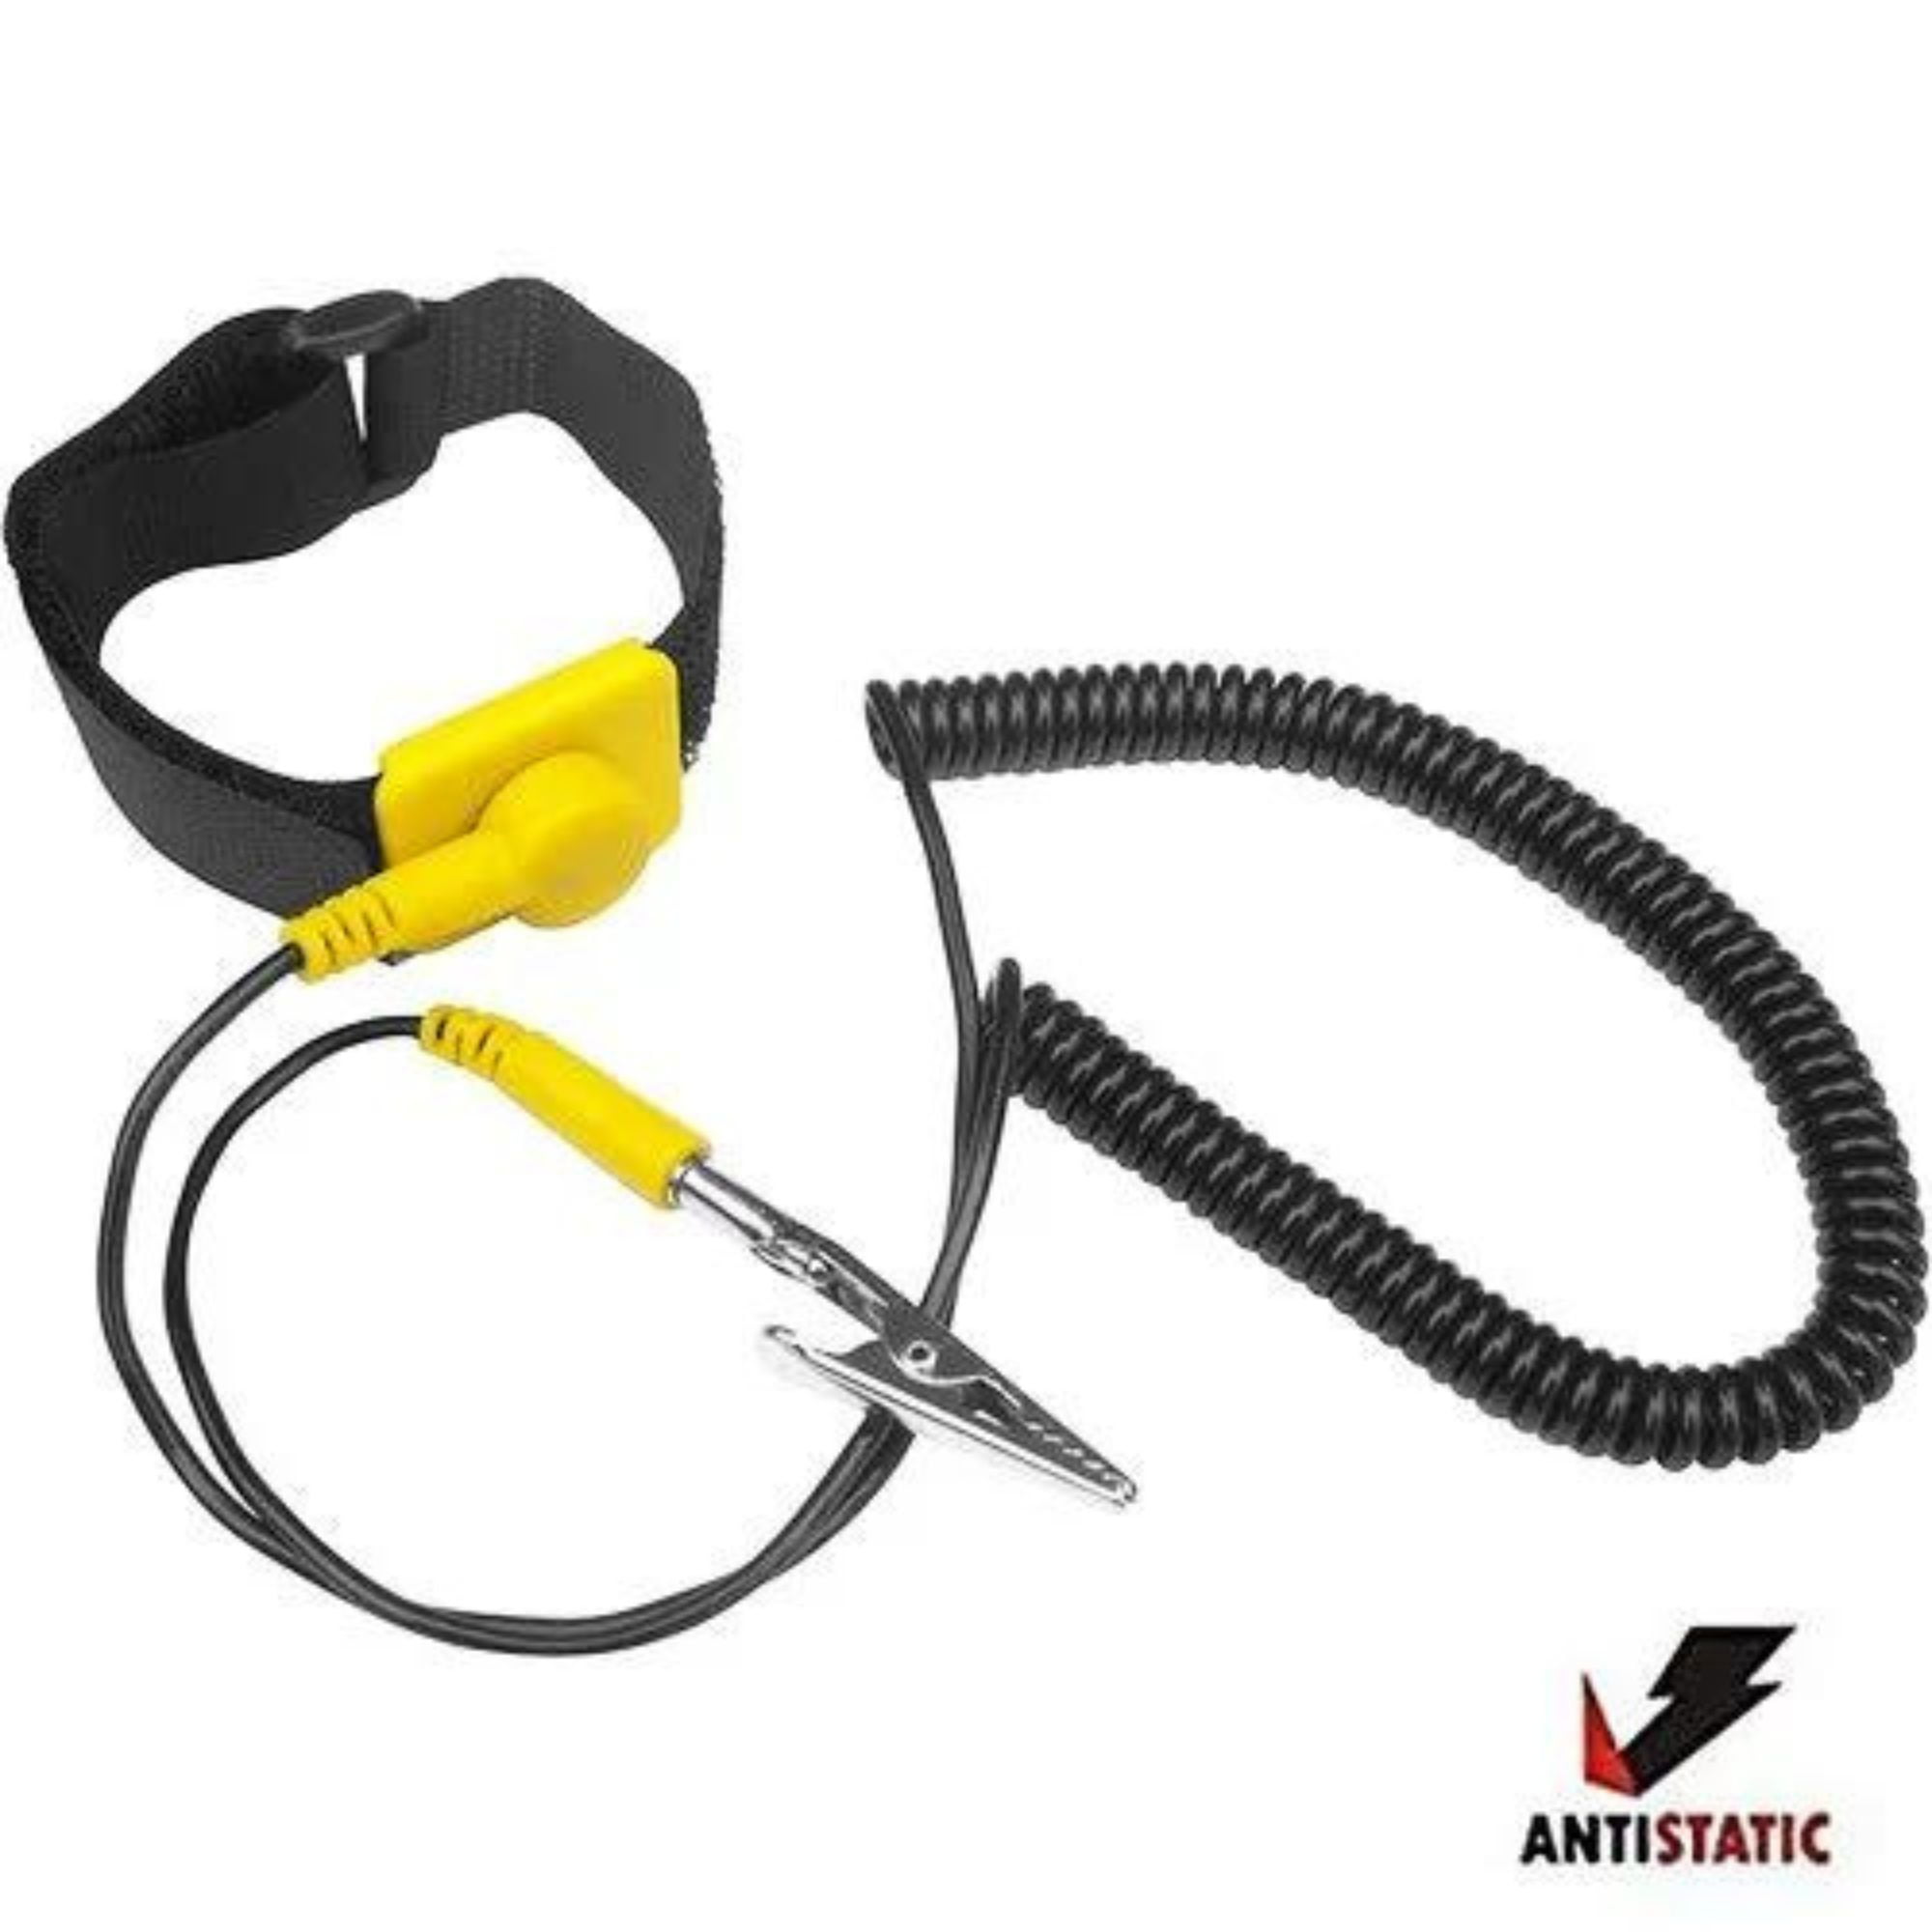 Wrist Straps  for ESD Safe Grounding – Botron Static Control